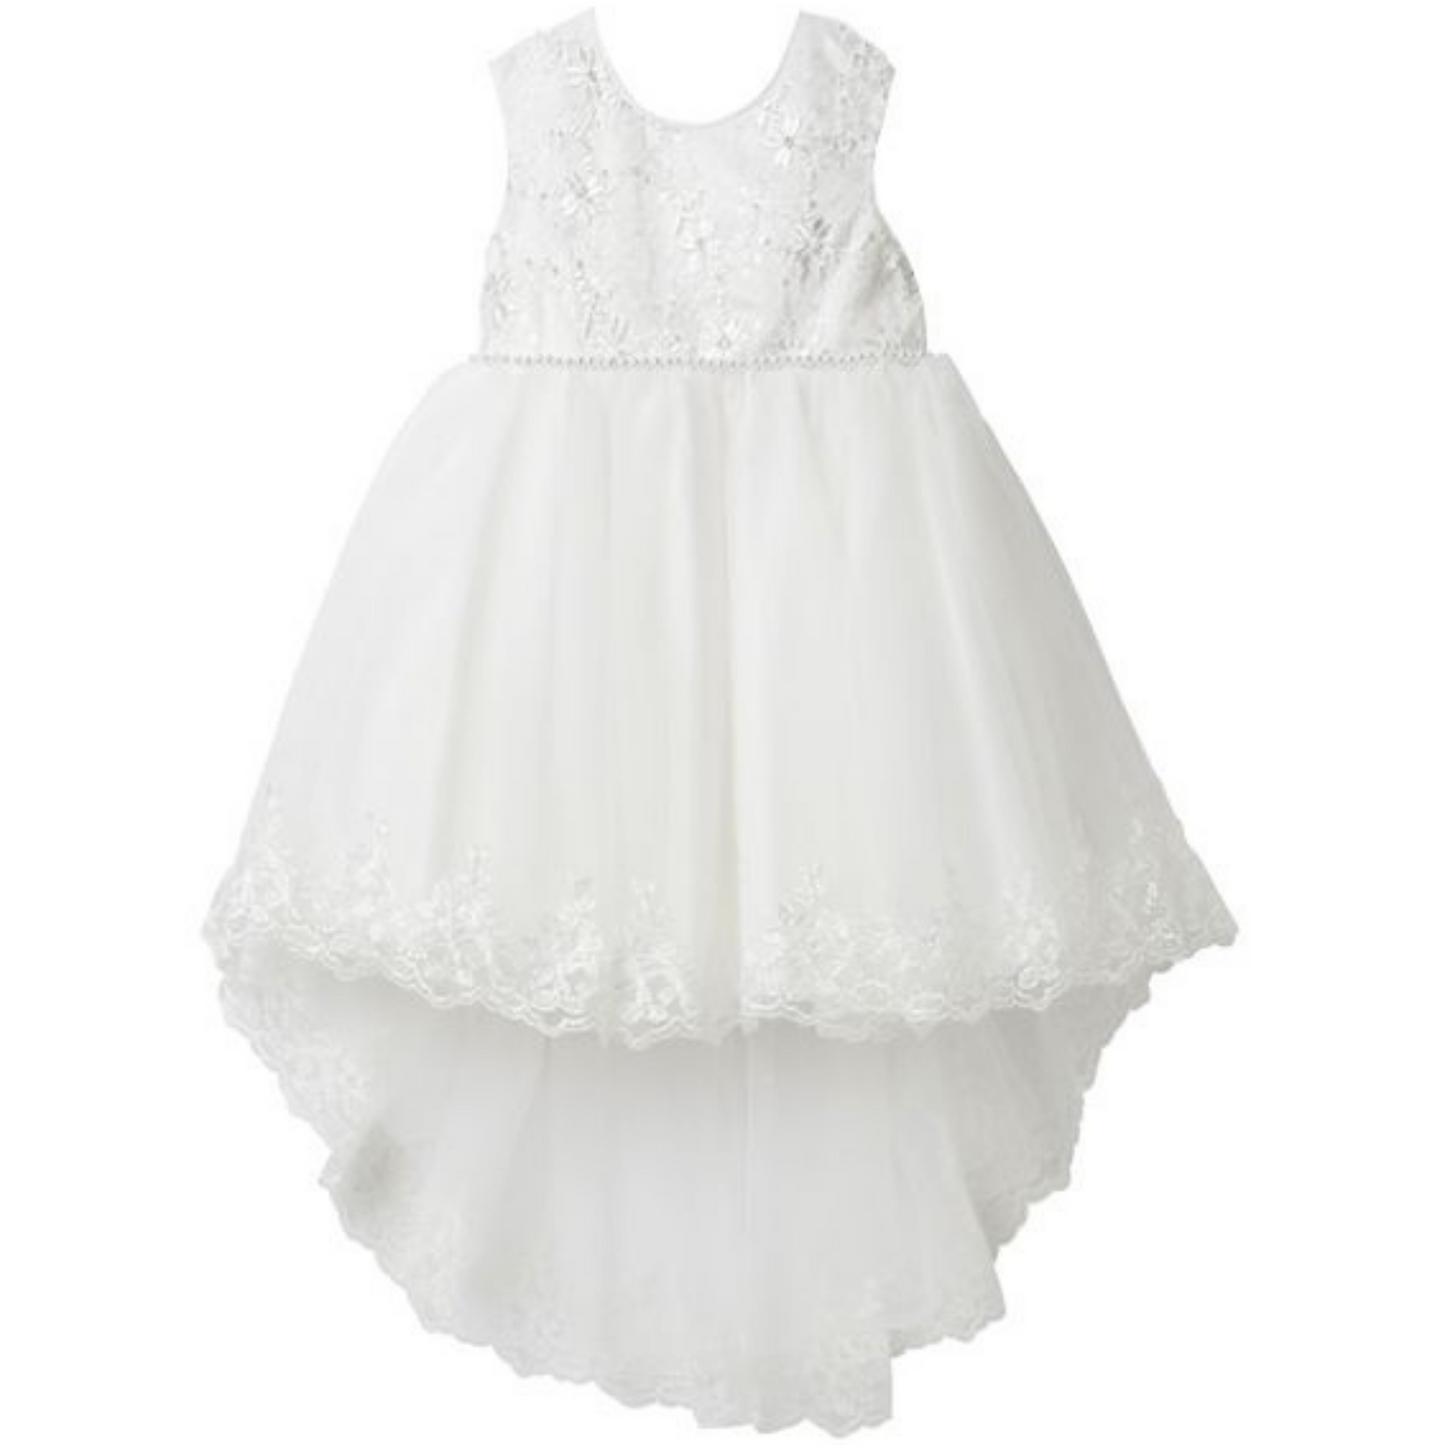 Girls 'Khloe' White Christening/Party Dress With Train Back Detail